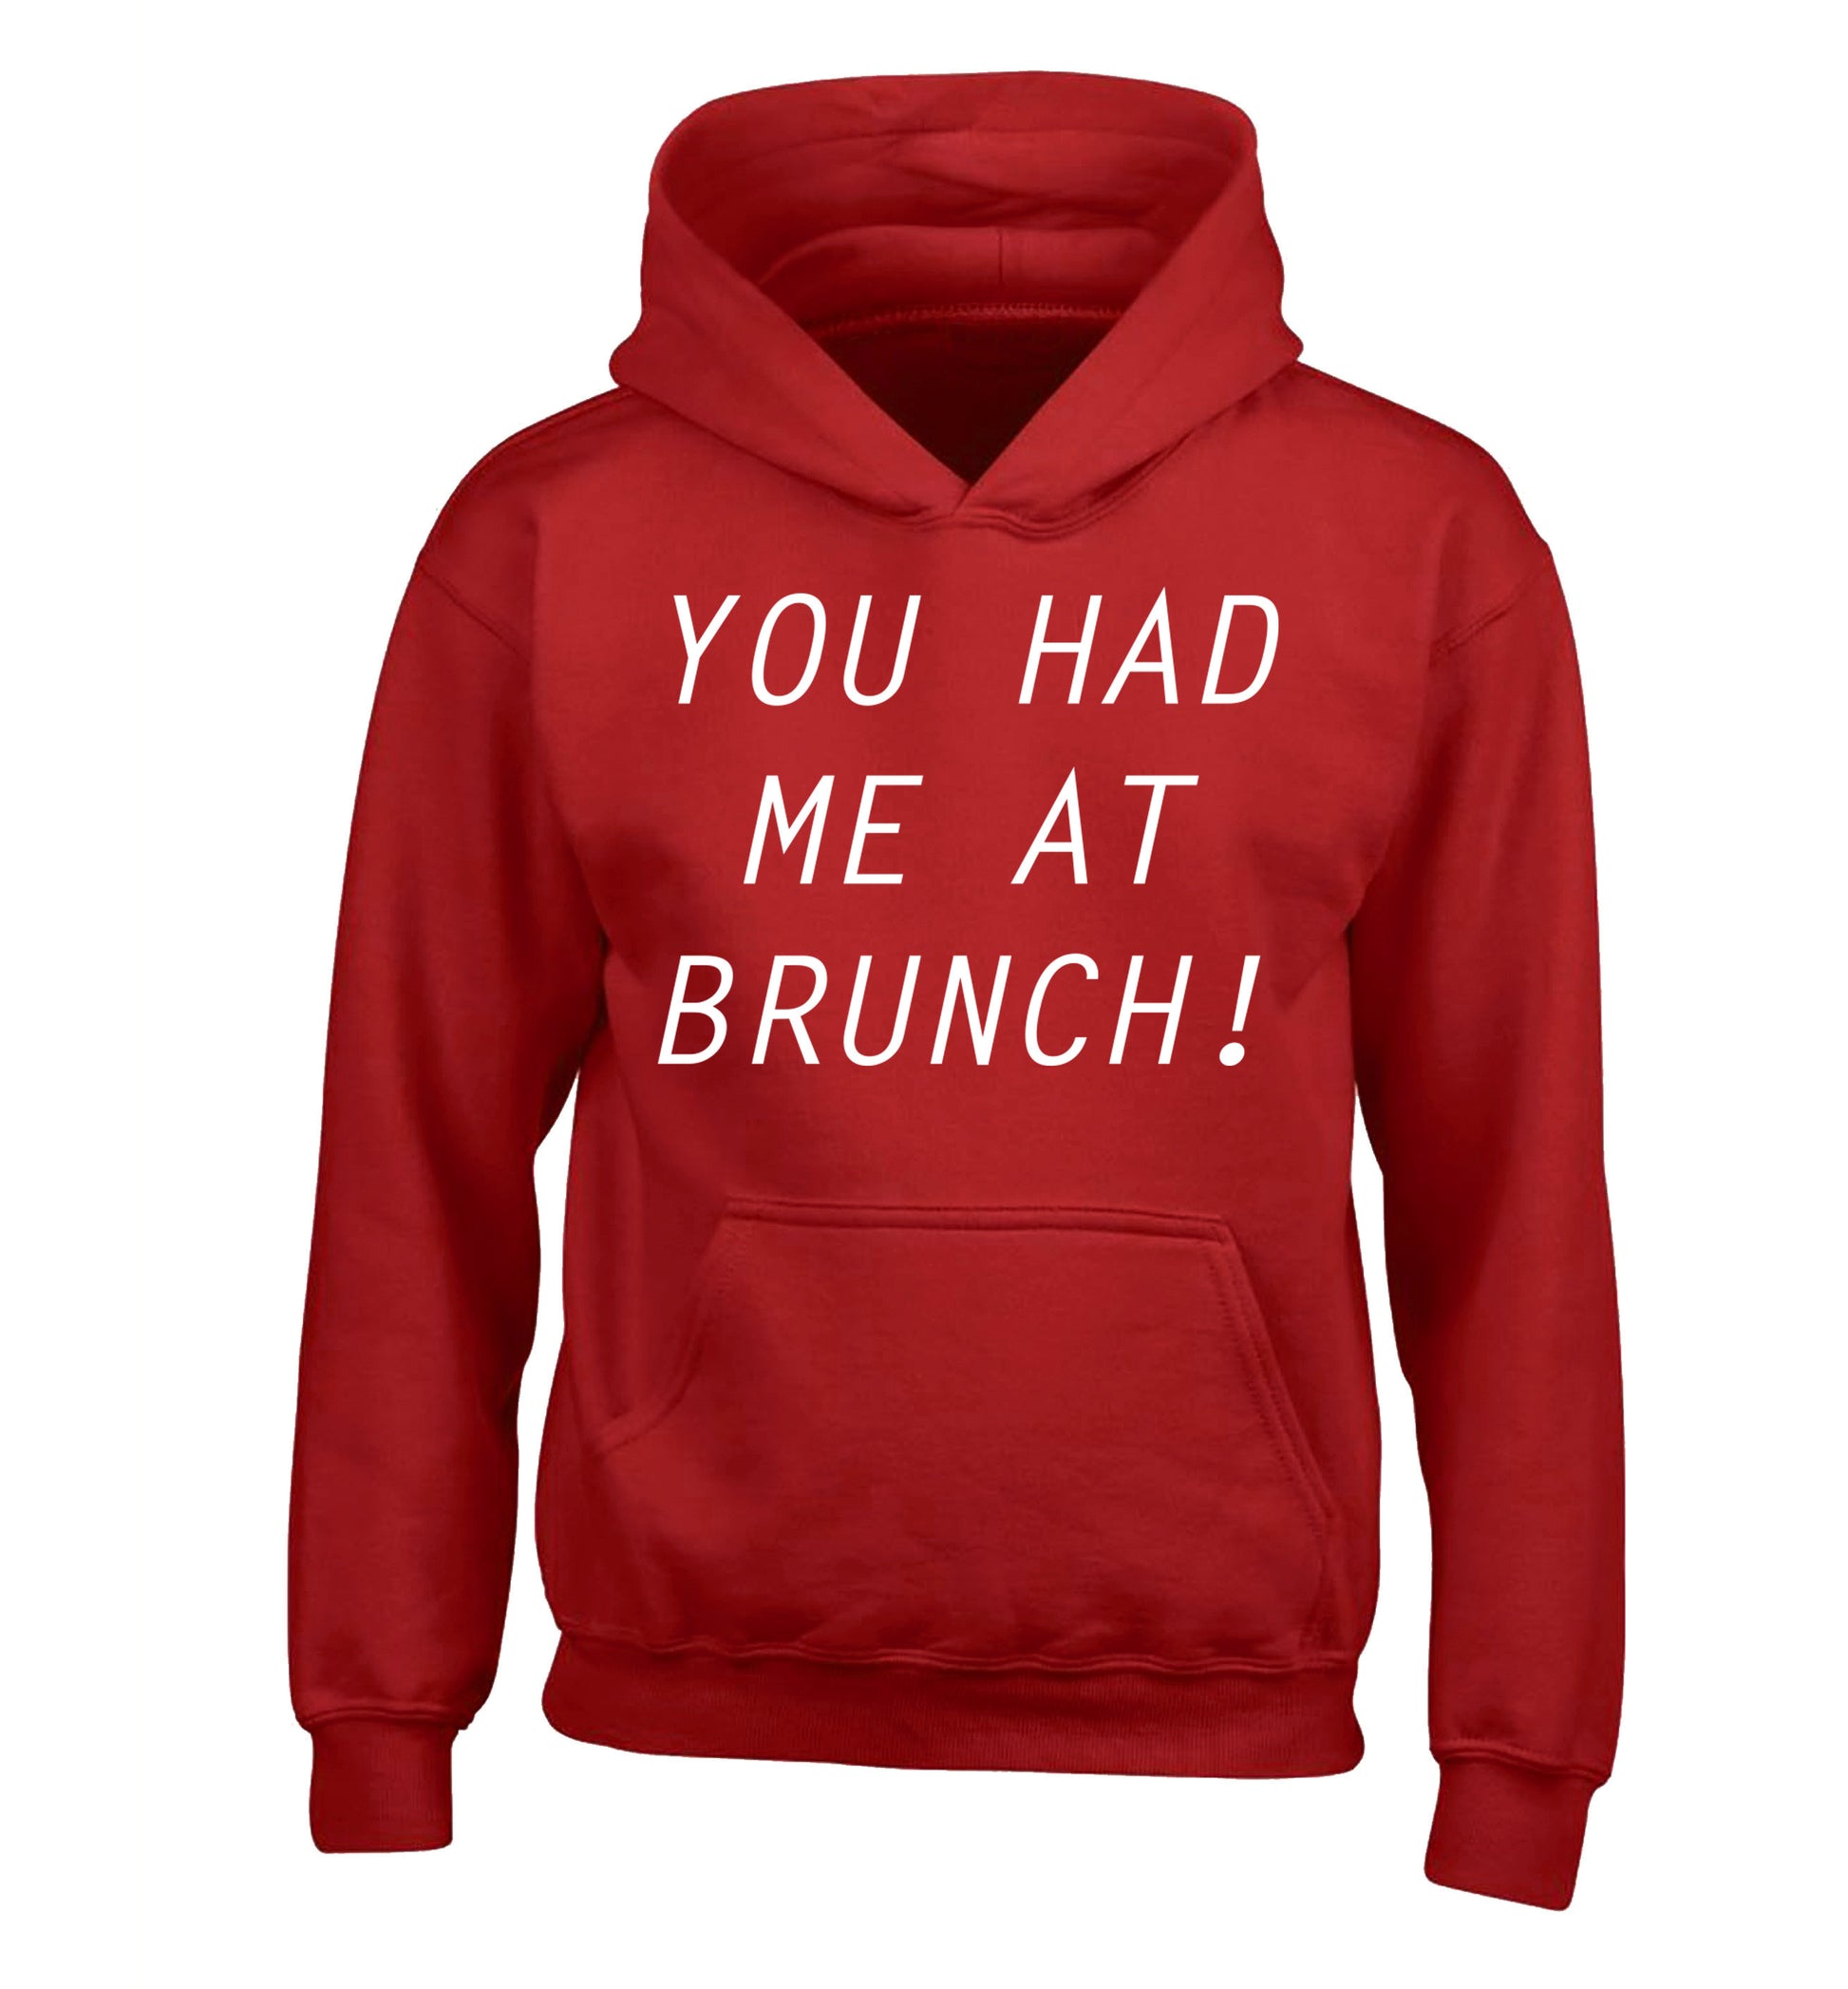 You had me at brunch children's black sweater 12-14 Years